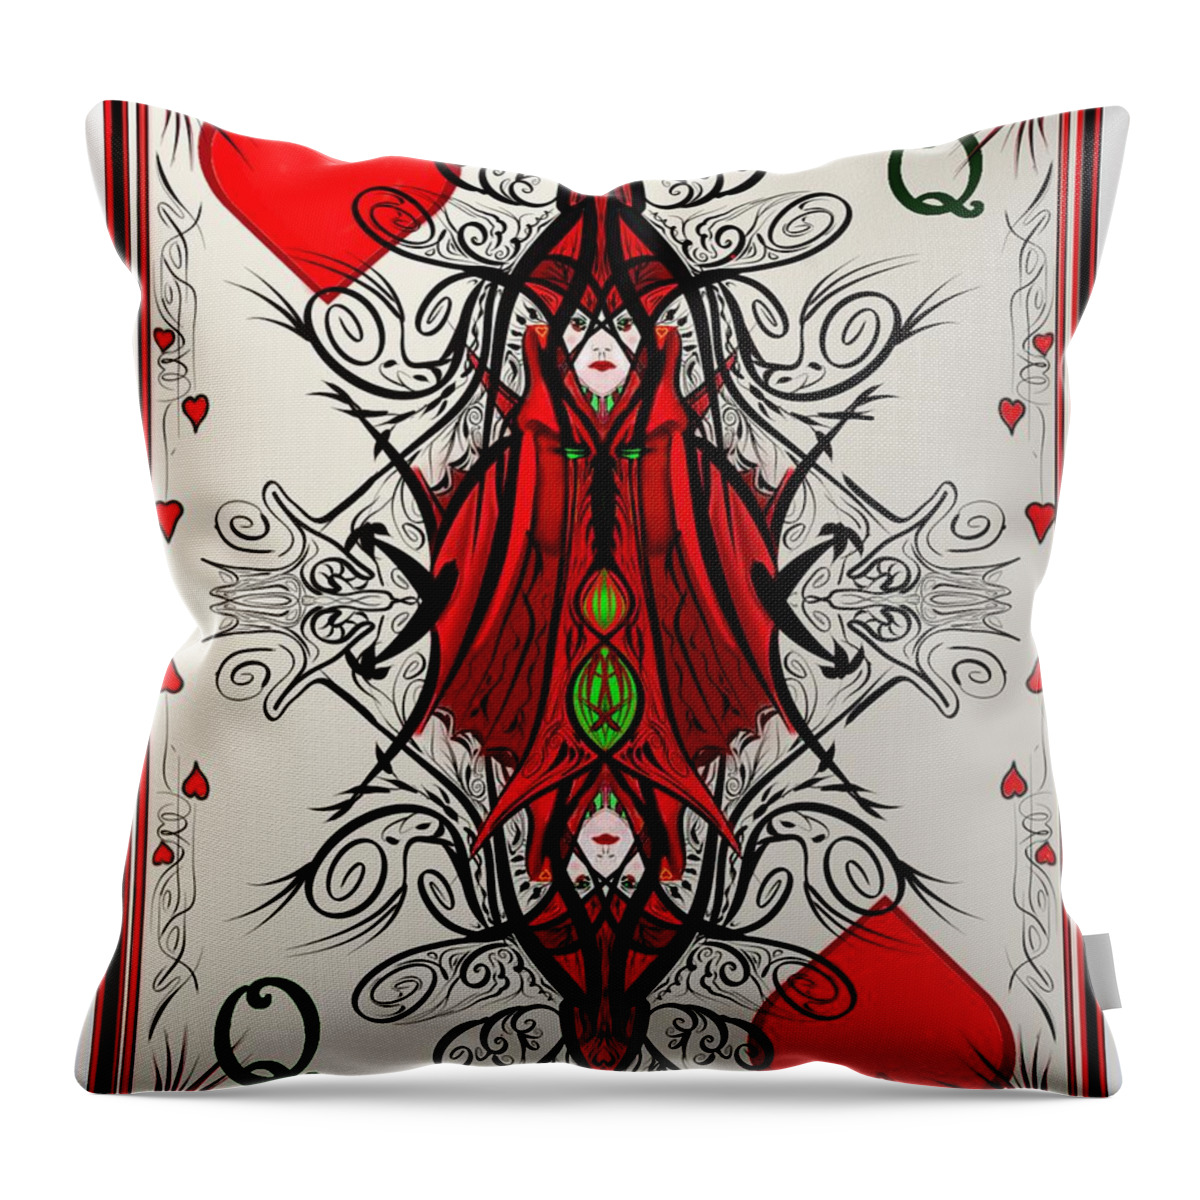 Cards Throw Pillow featuring the digital art Queen of Arts by Douglas Day Jones